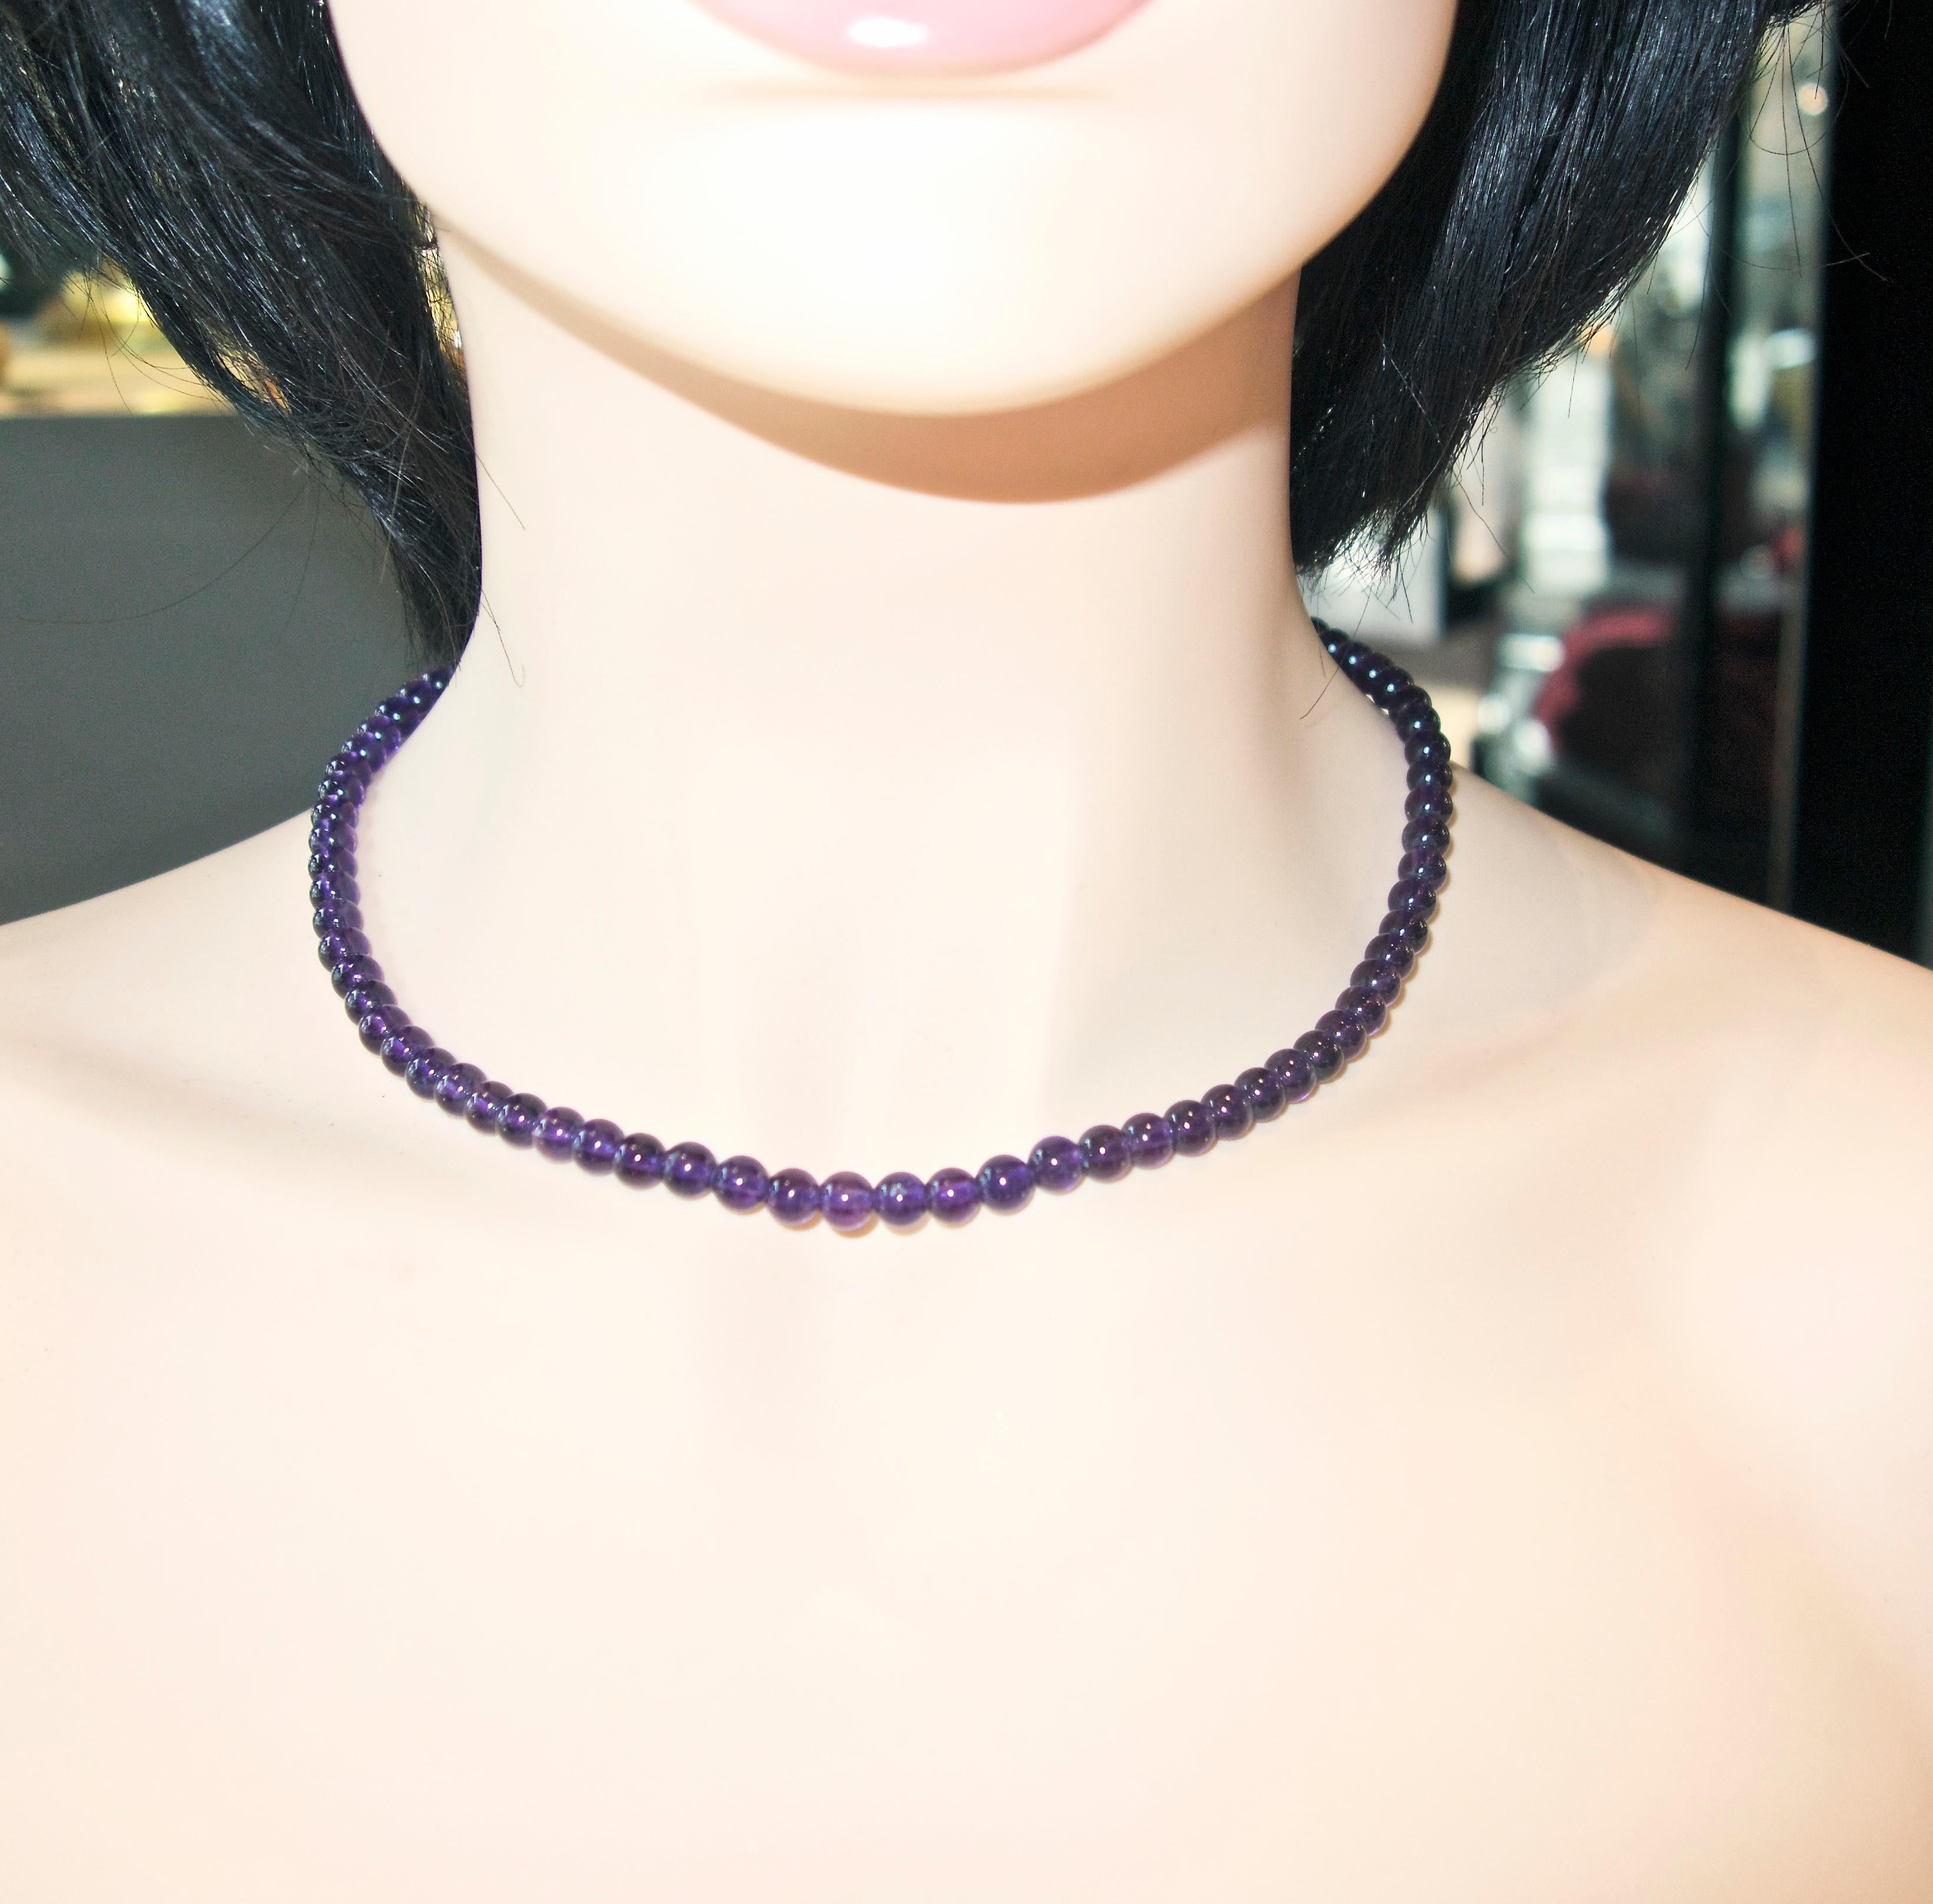 Natural amethyst necklace of deep purple color, the 66 amethysts are well matched and are 6.2 to 6.4 mm. in size.  The necklace is 16.5 inches long with a fish hook type gold color clasp.